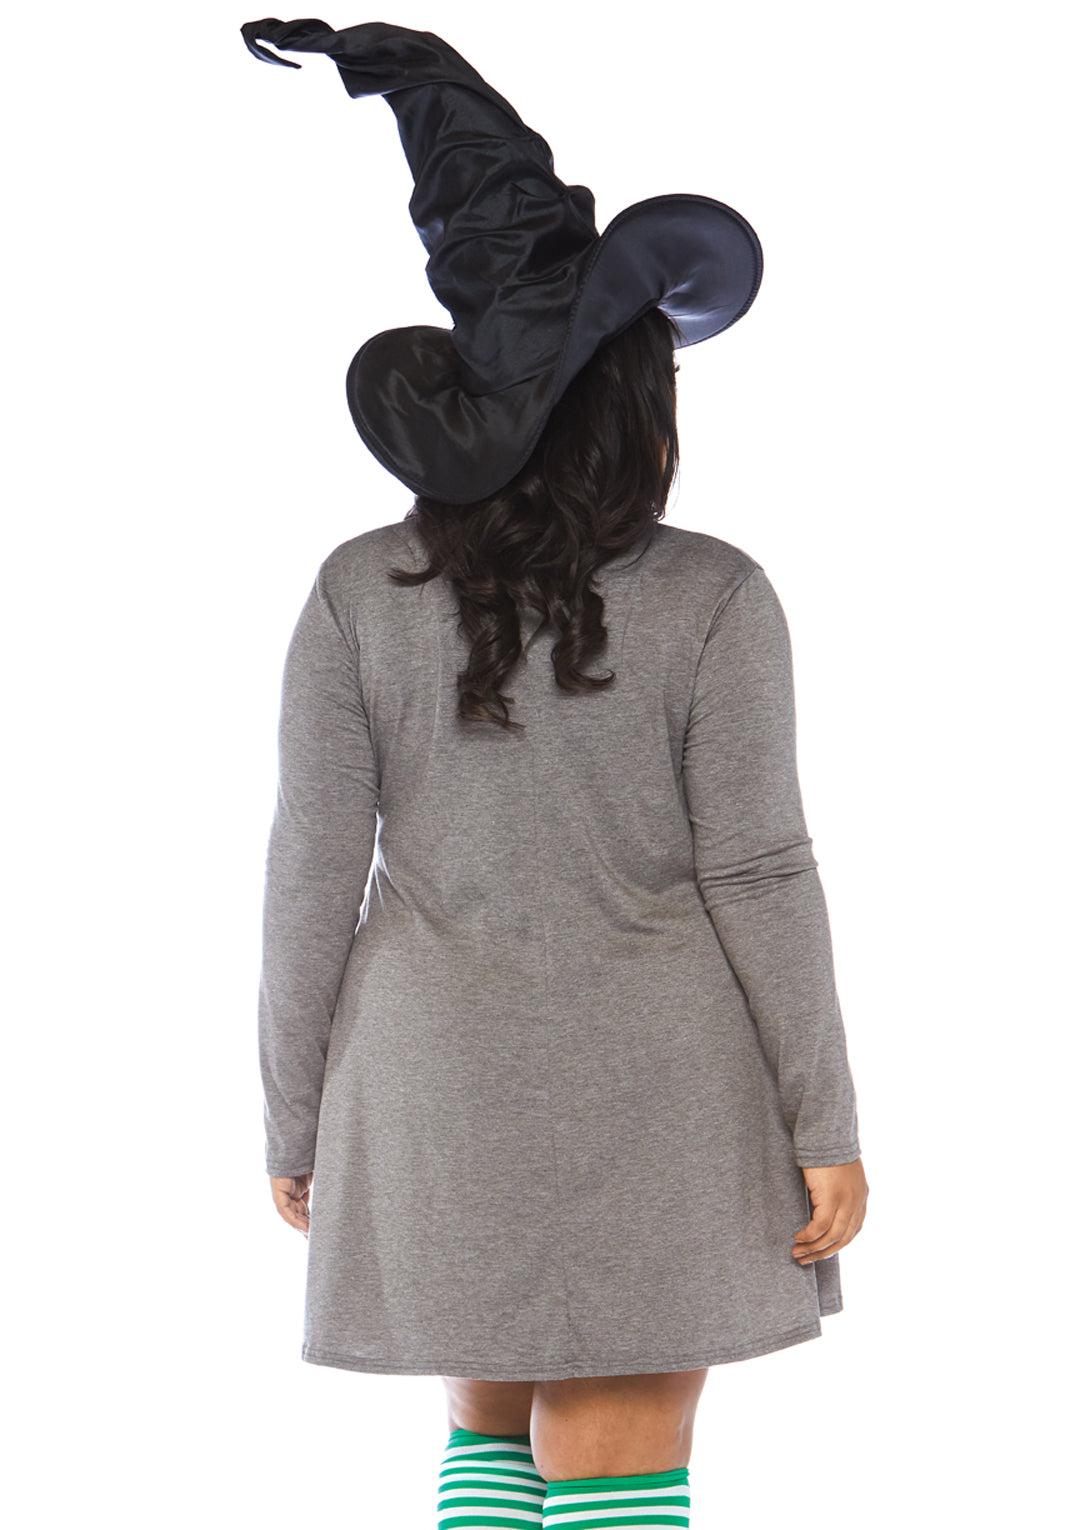 Basic Witch Long Sleeved Jersey Dress With Pockets